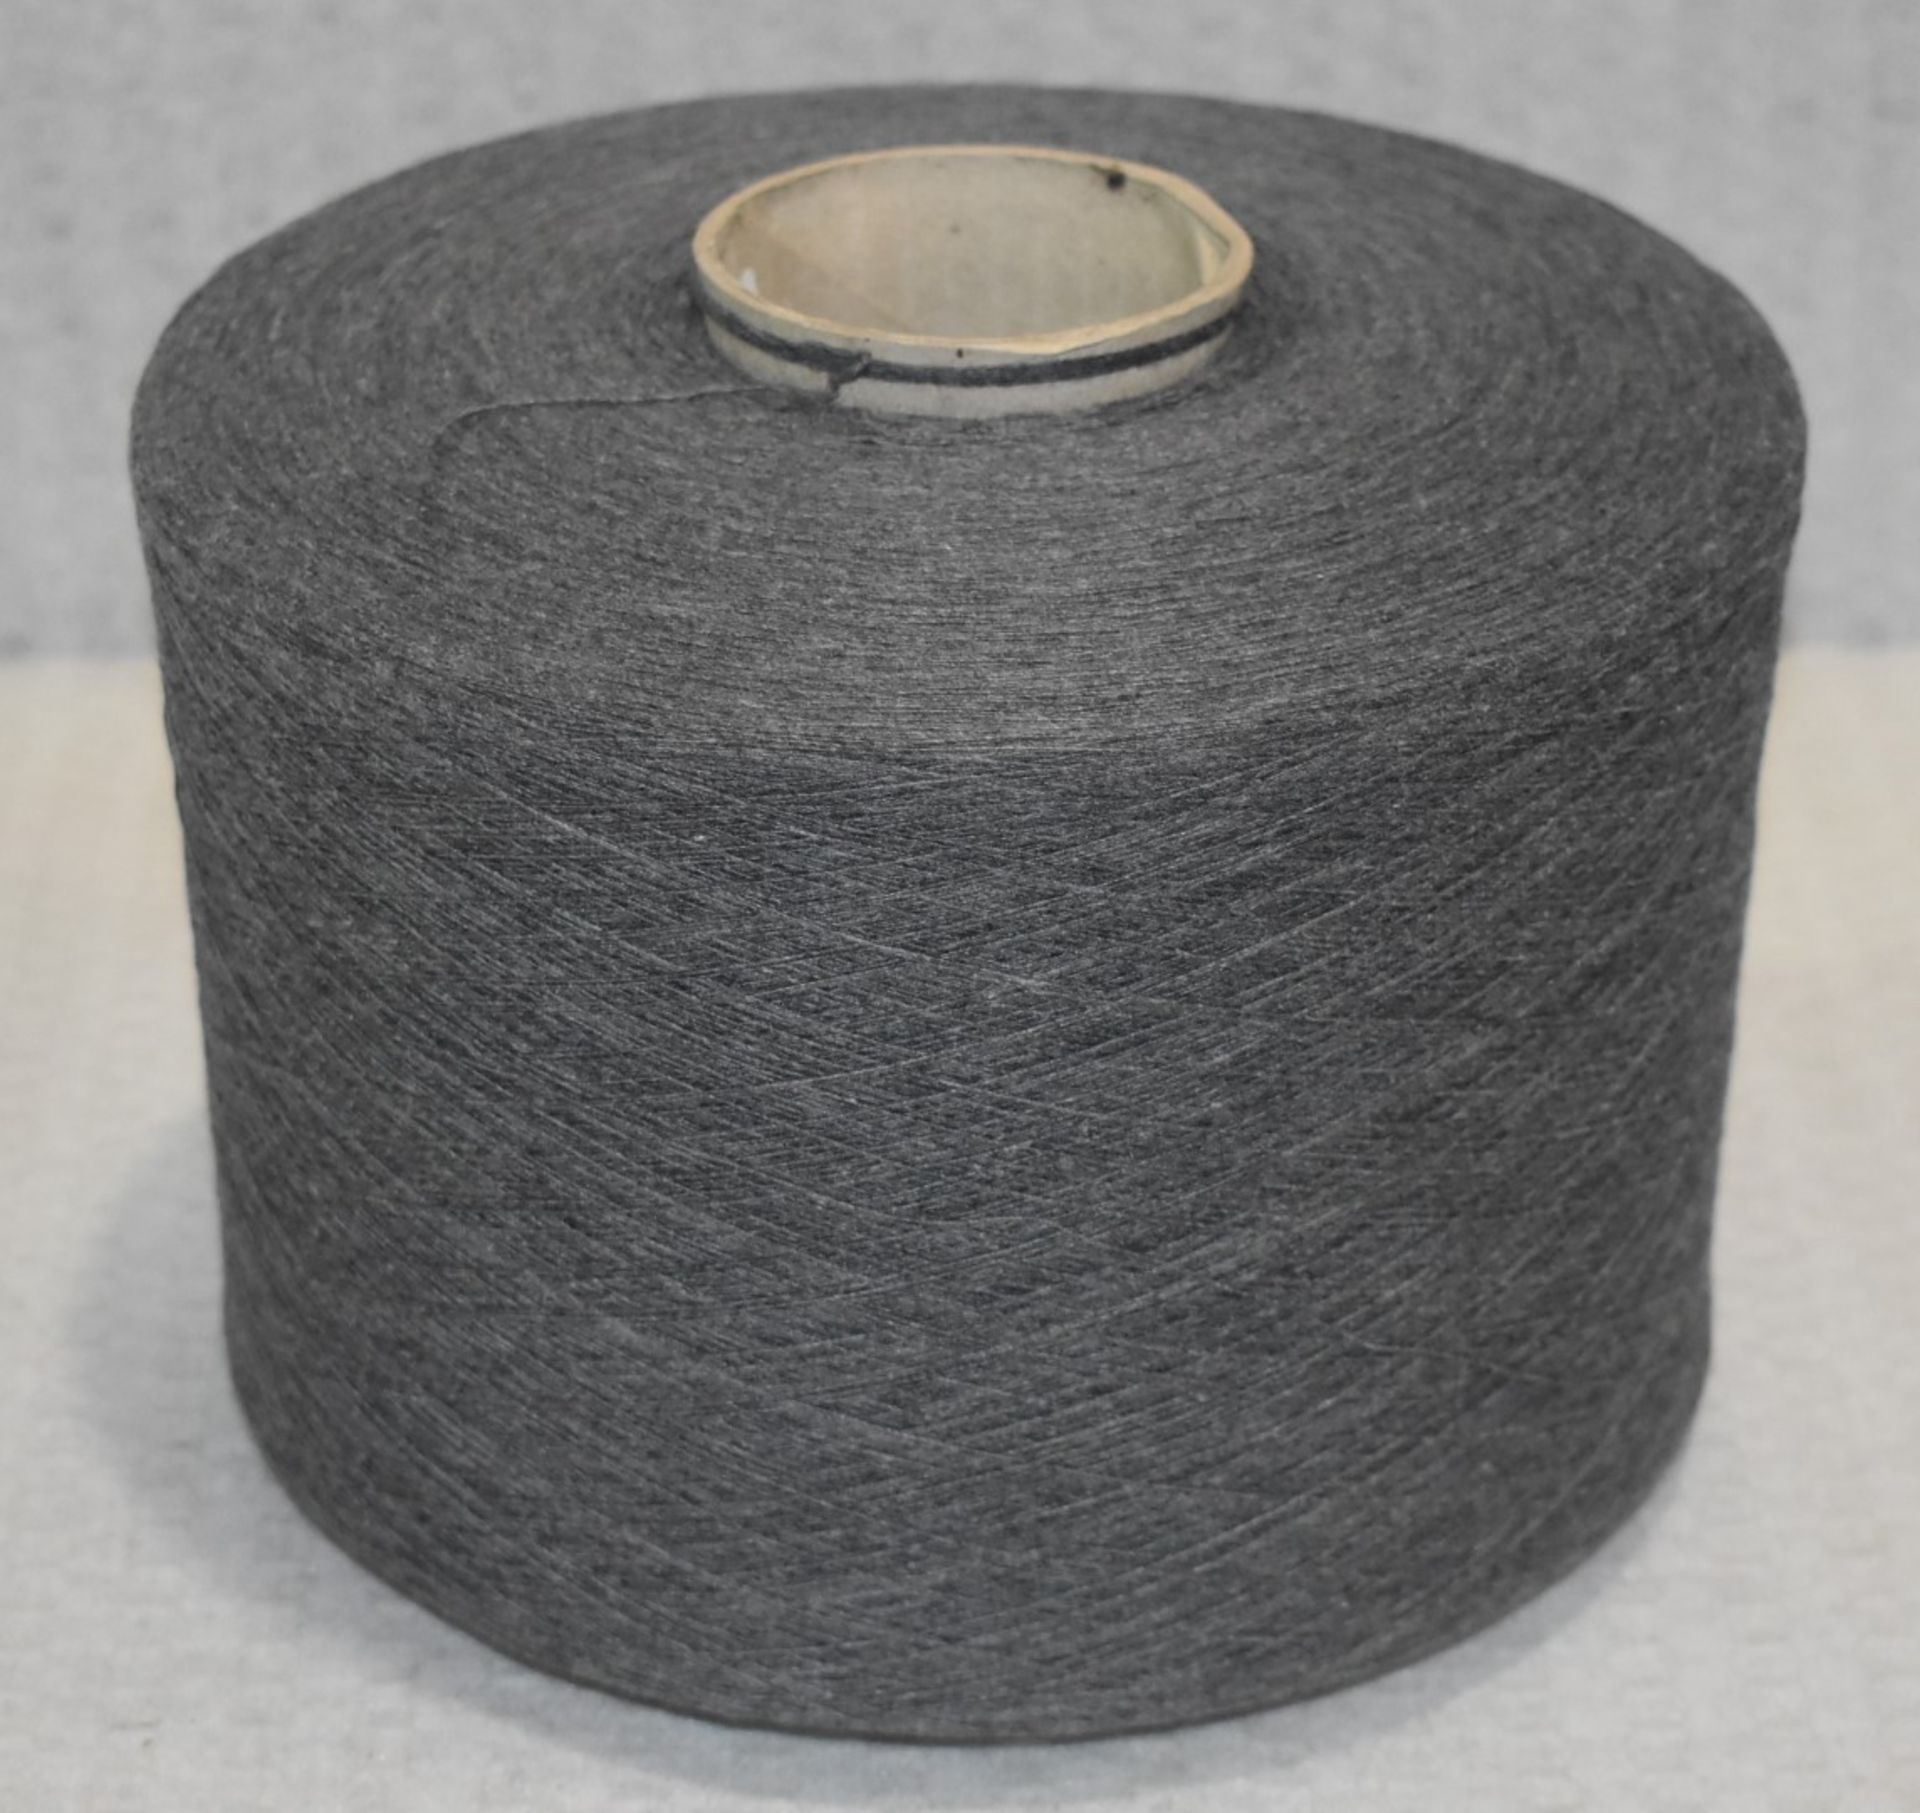 1 x Cone of 1/13 MicroCotton Knitting Yarn - Mid Grey - Approx Weight: 2,500g - New Stock ABL Yarn - Image 7 of 9